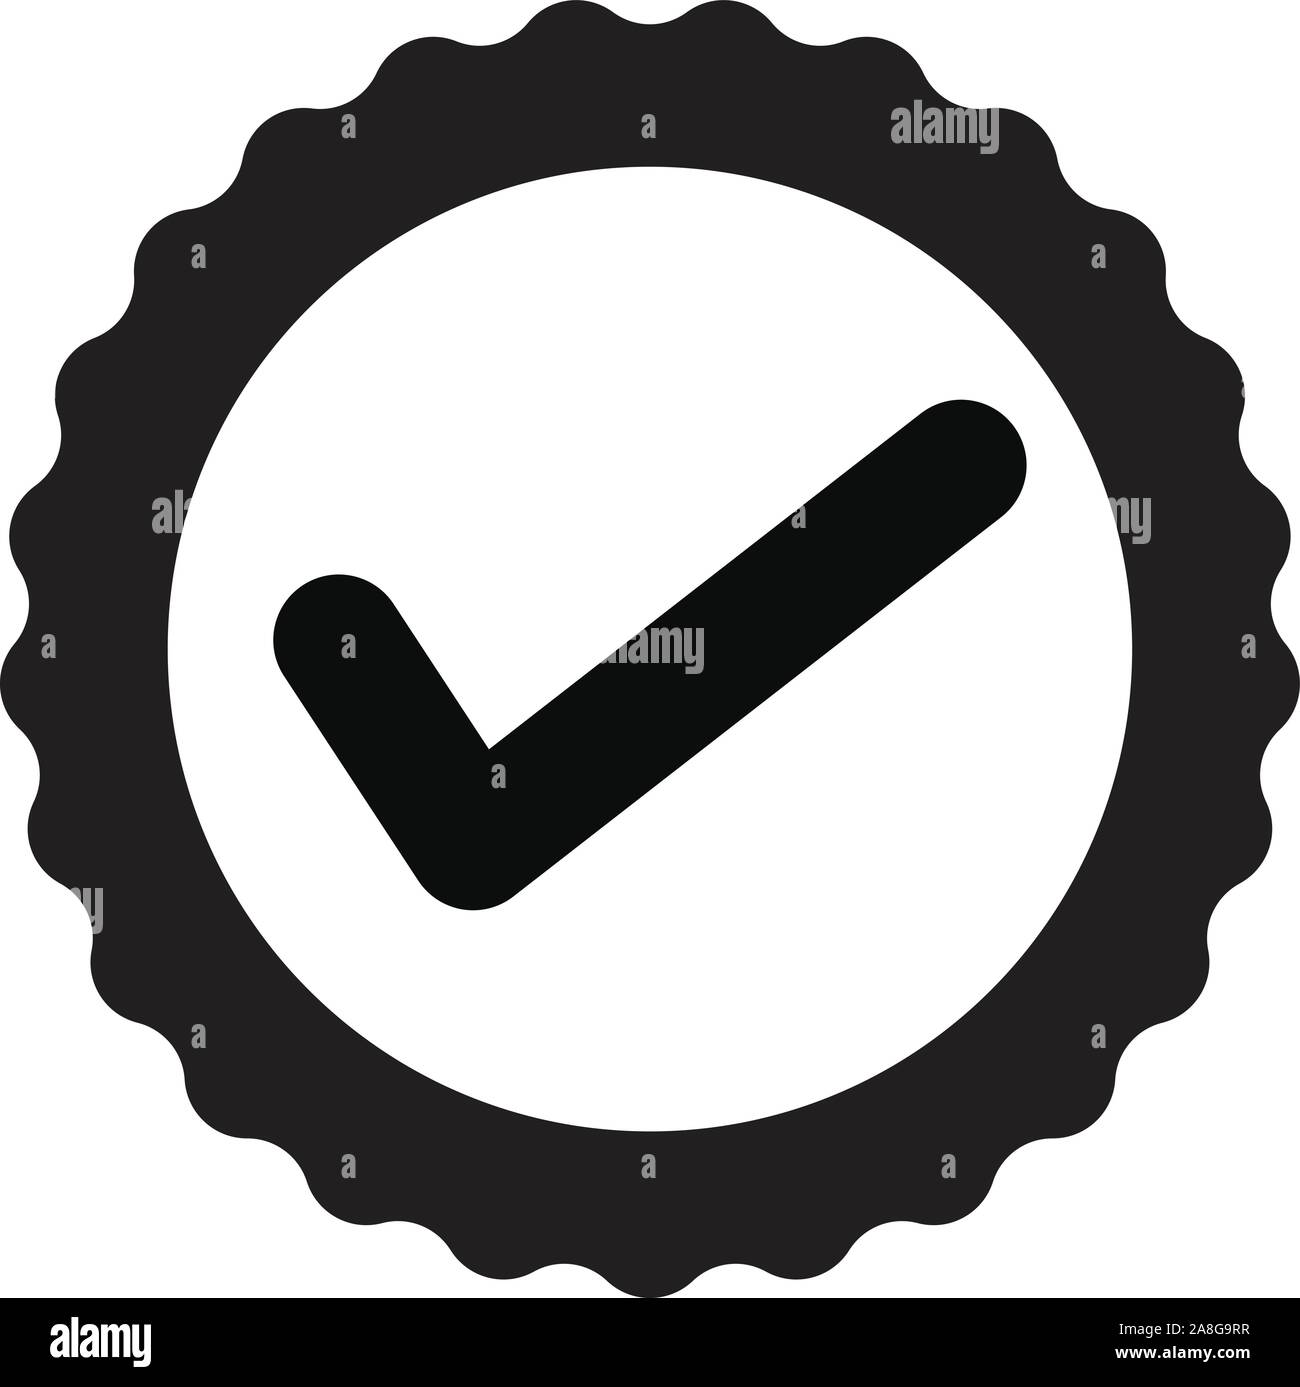 approved certificate icon on white background. flat style. approved icon for your web site design, logo, app, UI. check mark symbol. accepted sign. Stock Vector